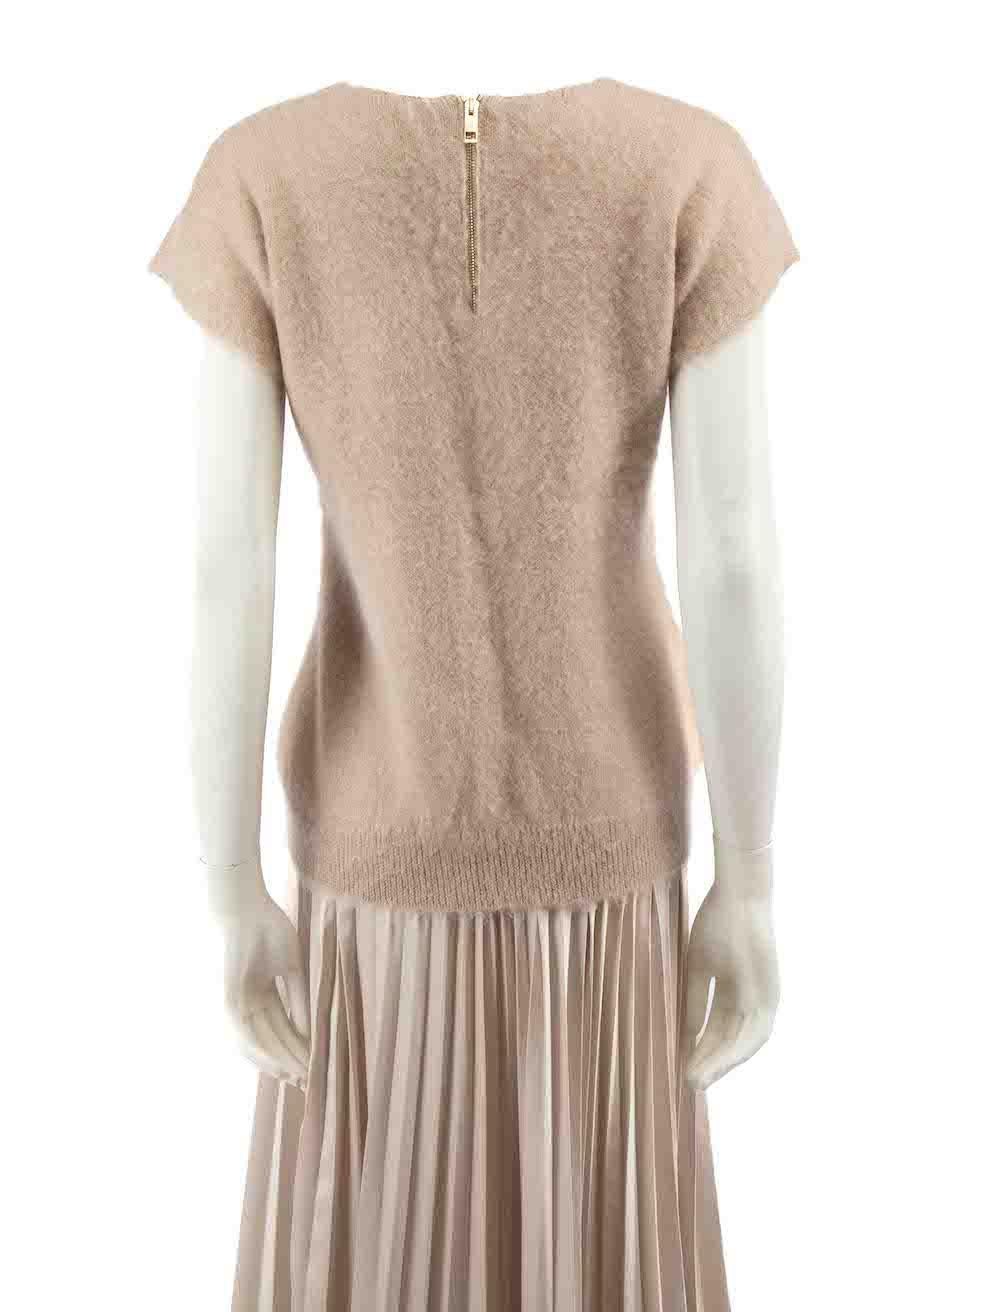 Burberry Beige Mohair Knitted Short Sleeve Jumper Size S In Good Condition For Sale In London, GB